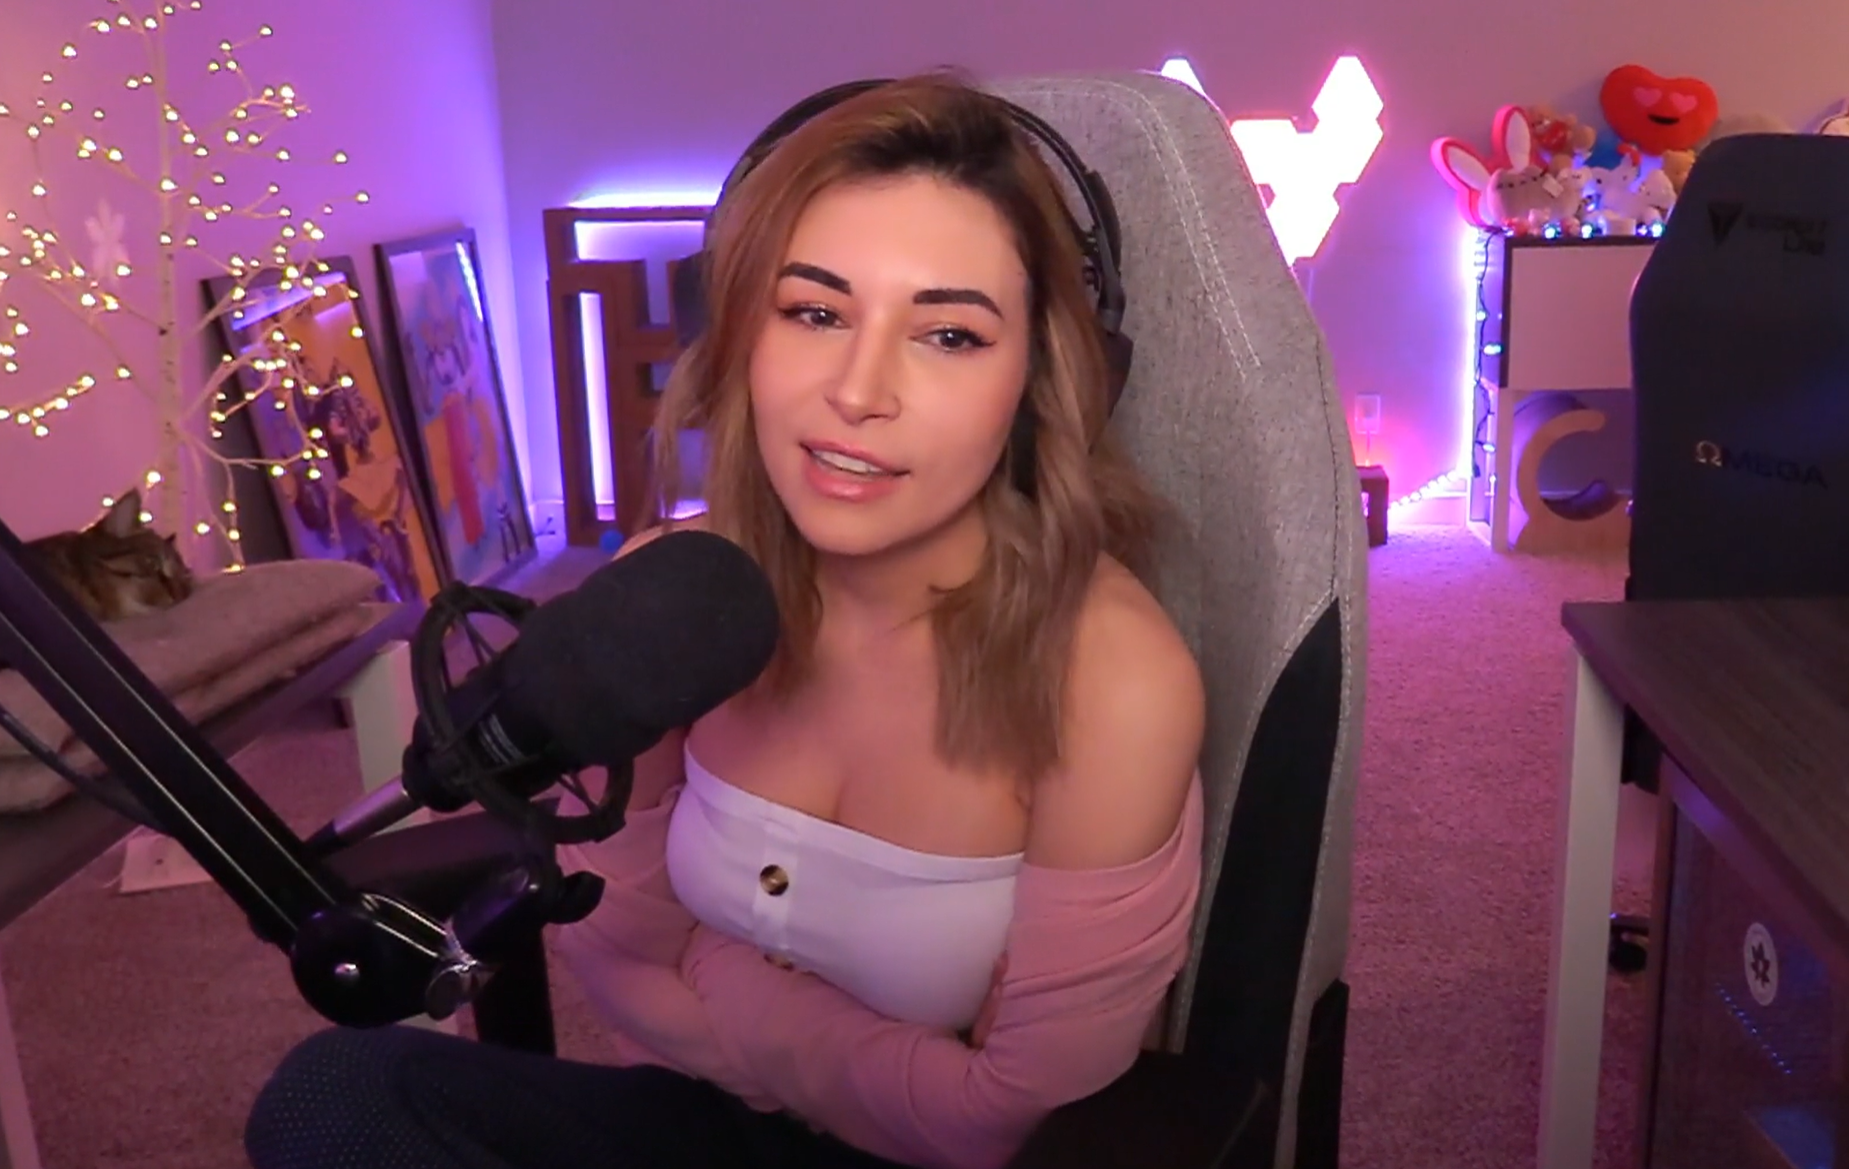 Naked alinity twitch FULL VIDEO: